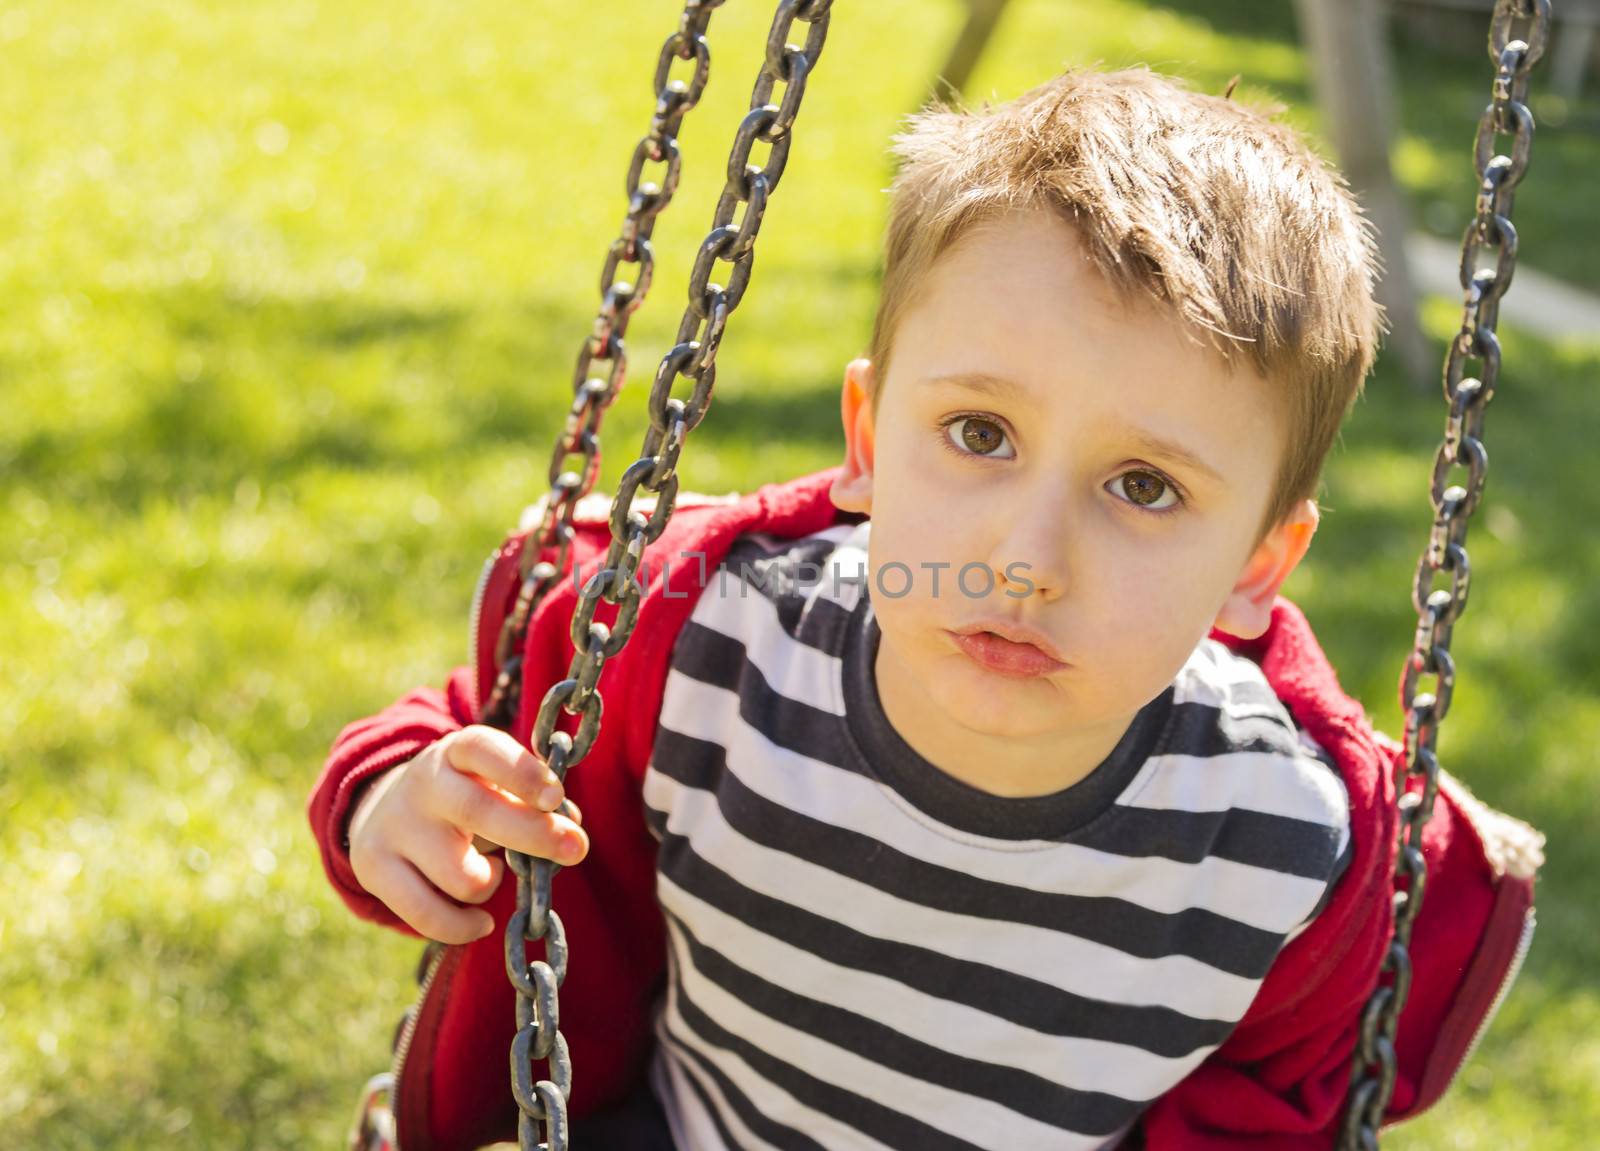 A child playing at the playground on a sunny day.